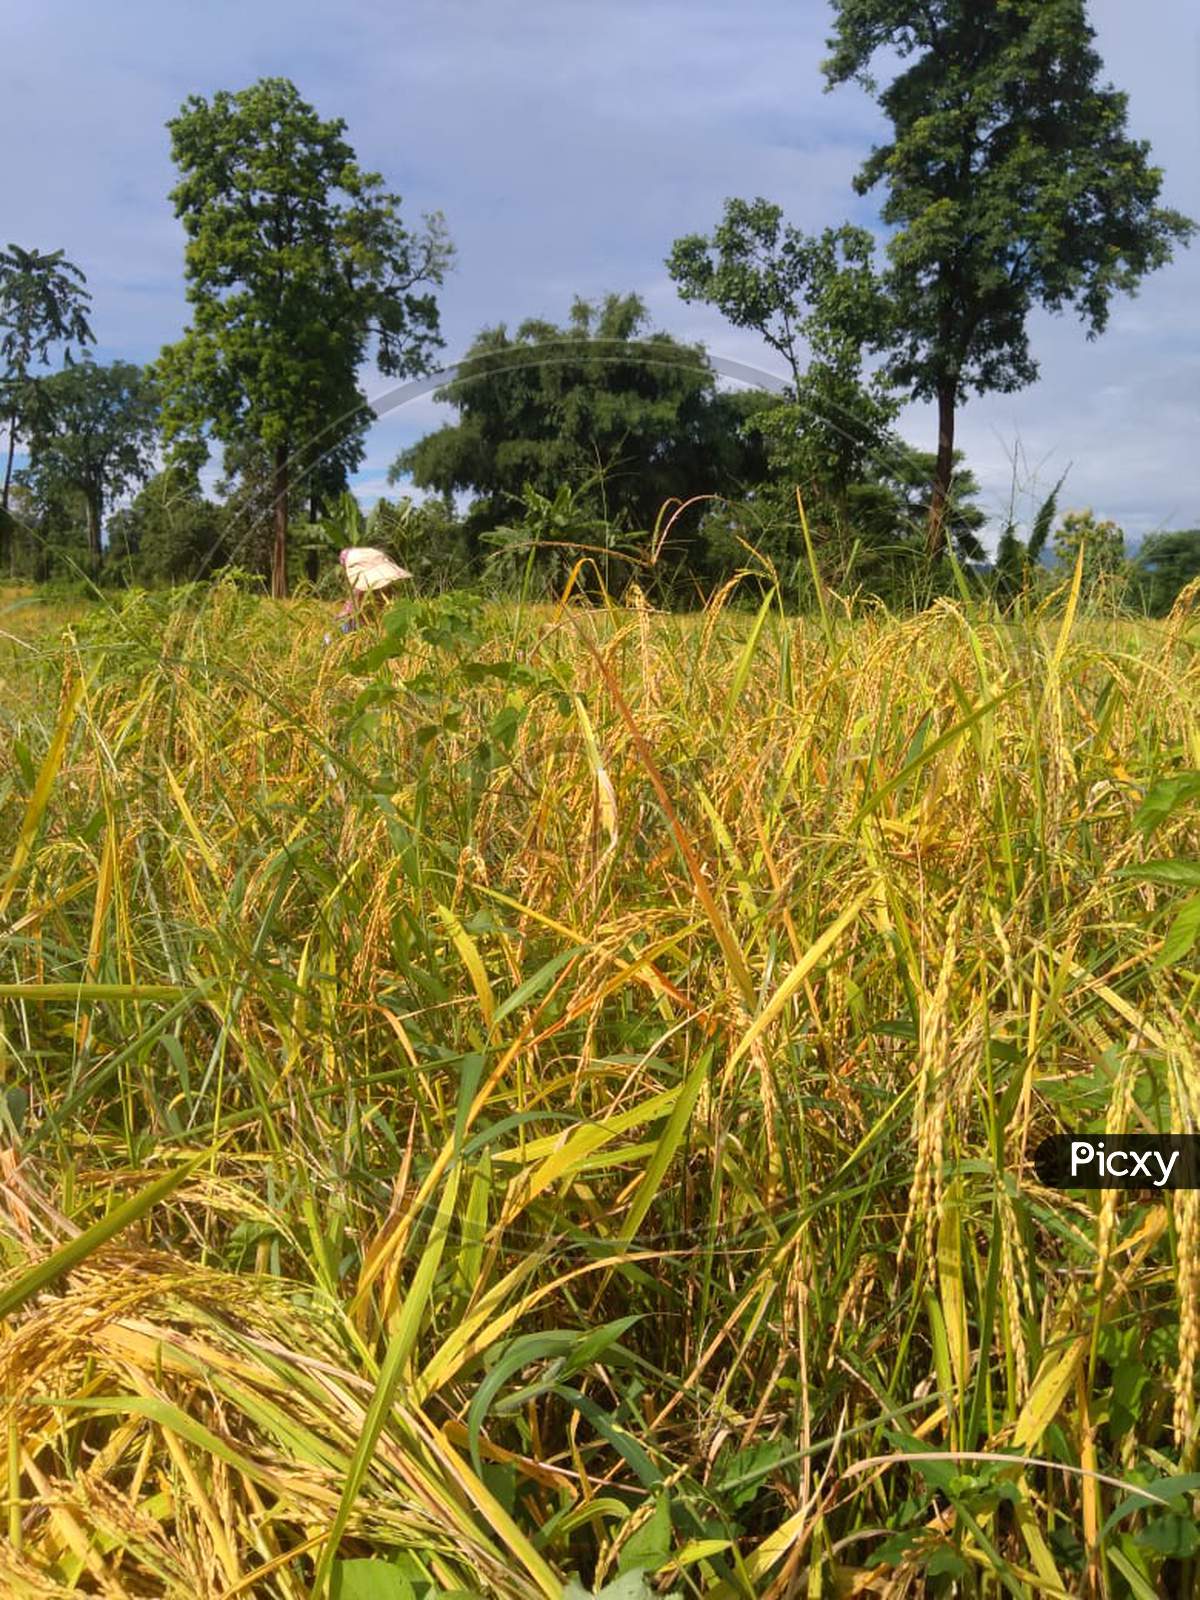 Crop, paddy field, cultivation